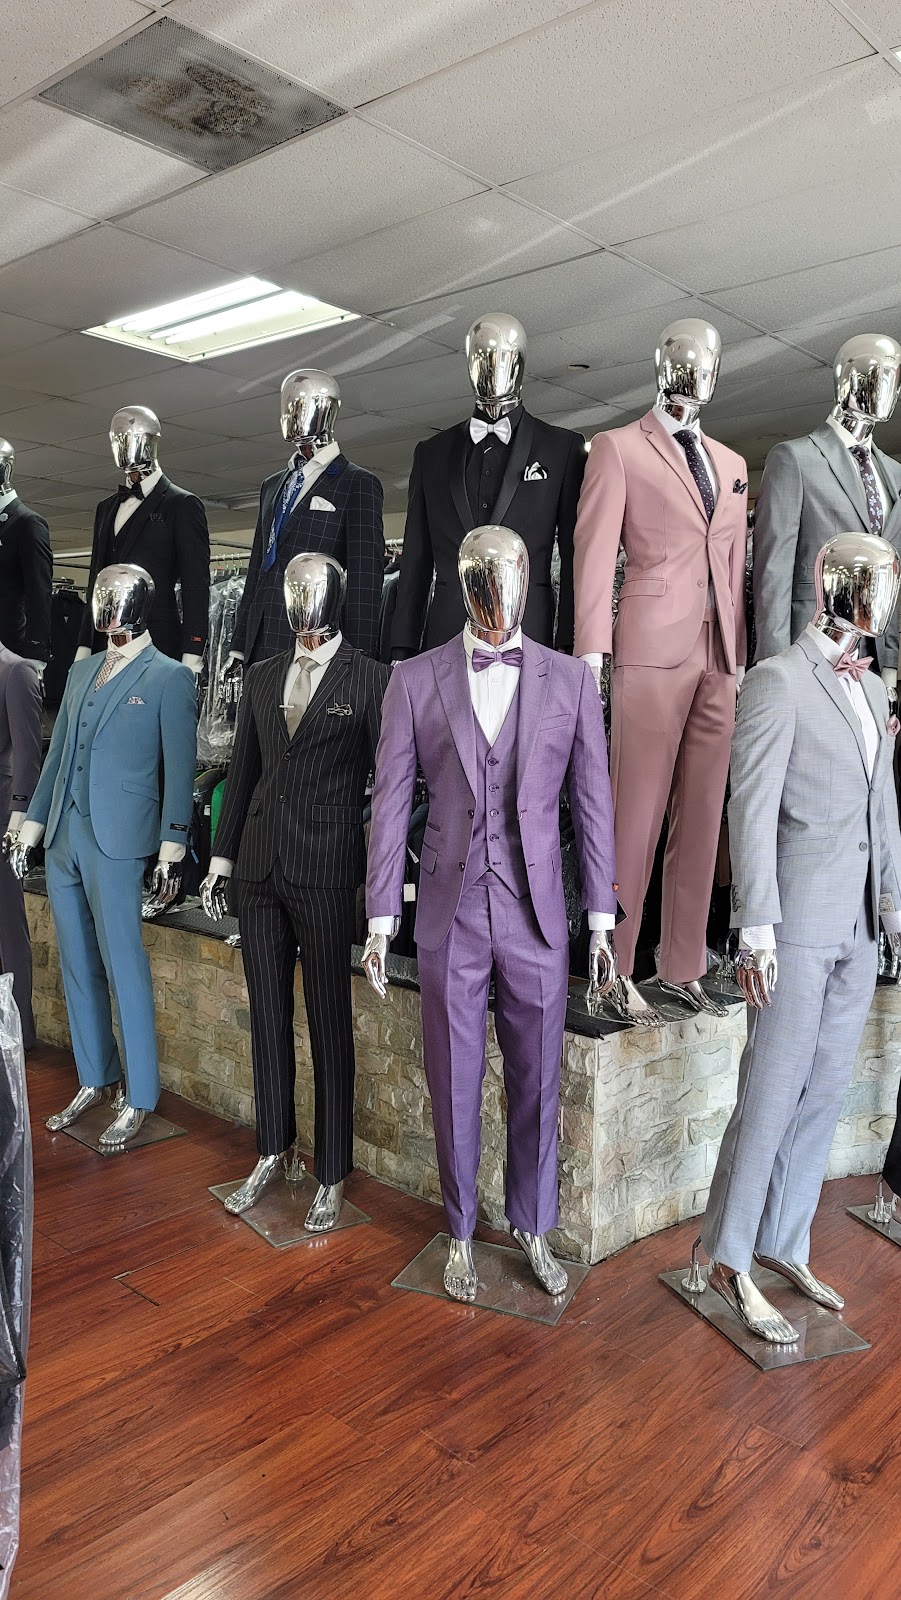 3 Mens Suits - My Collection by Alain Andre | 2301 Via Campo, Montebello, CA 90640, USA | Phone: (323) 721-3500